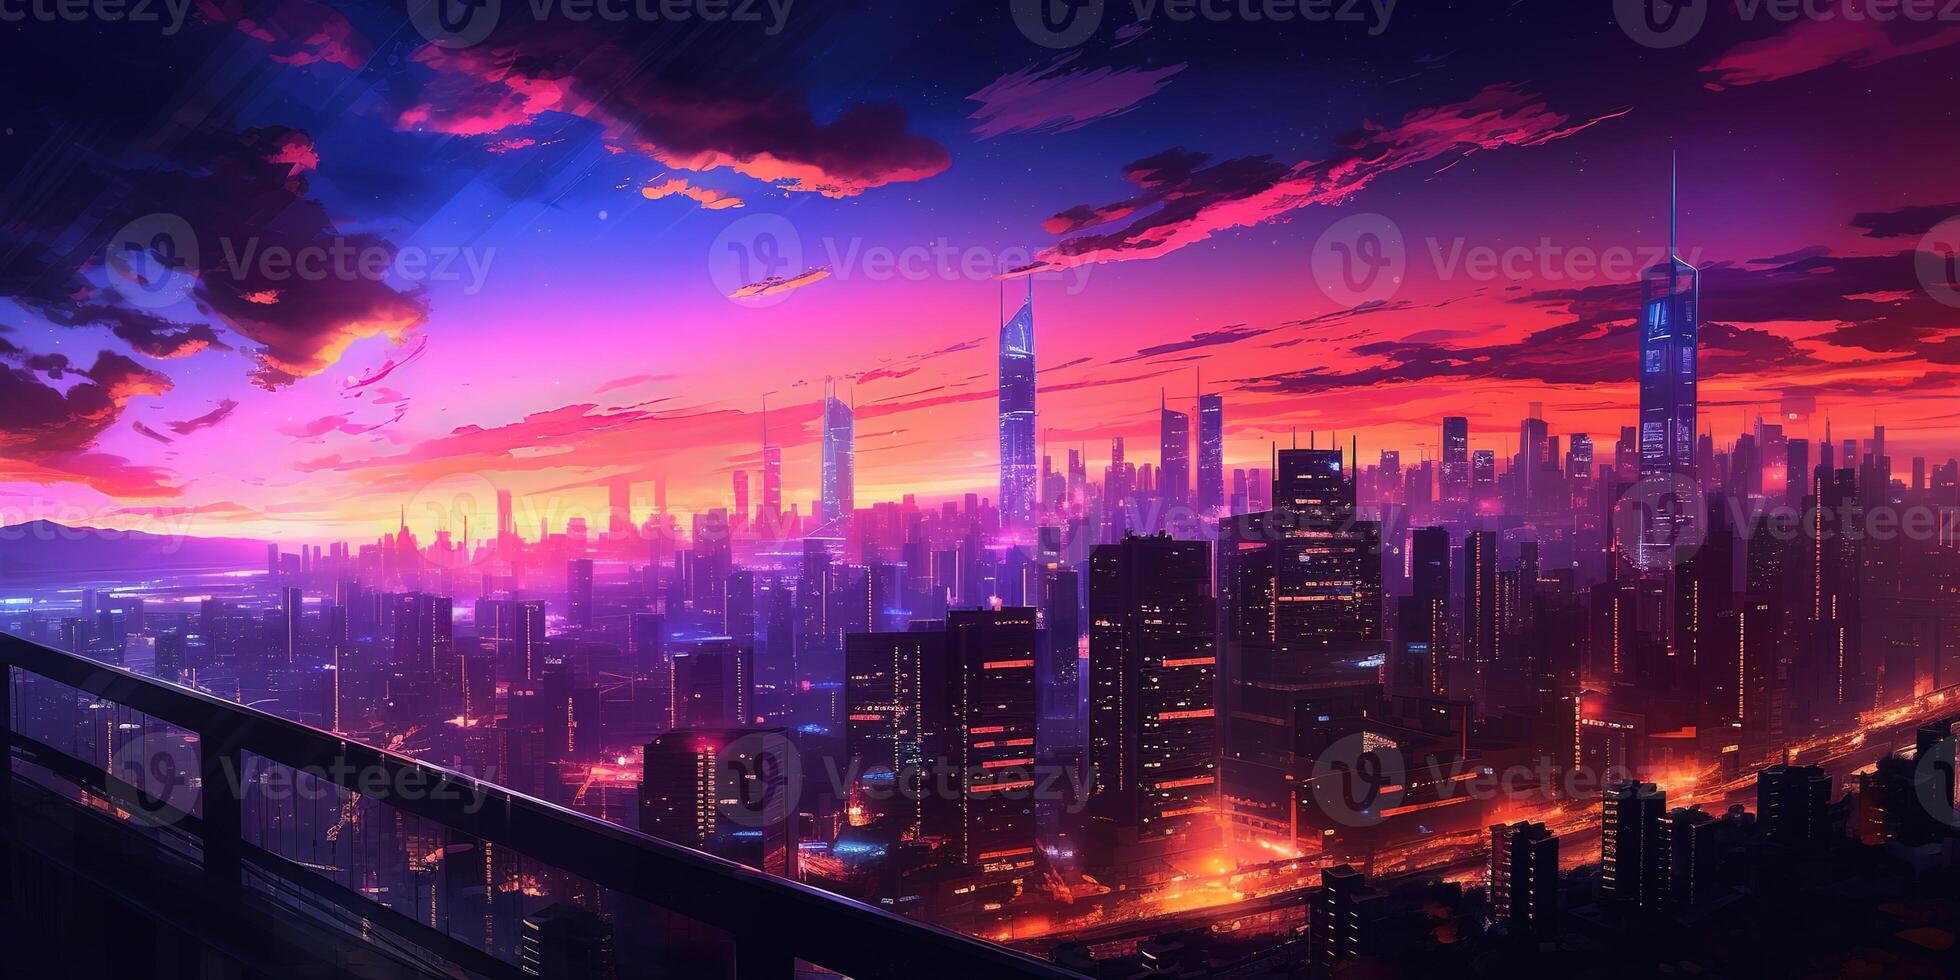 City and Neon Colors HD wallpaper download